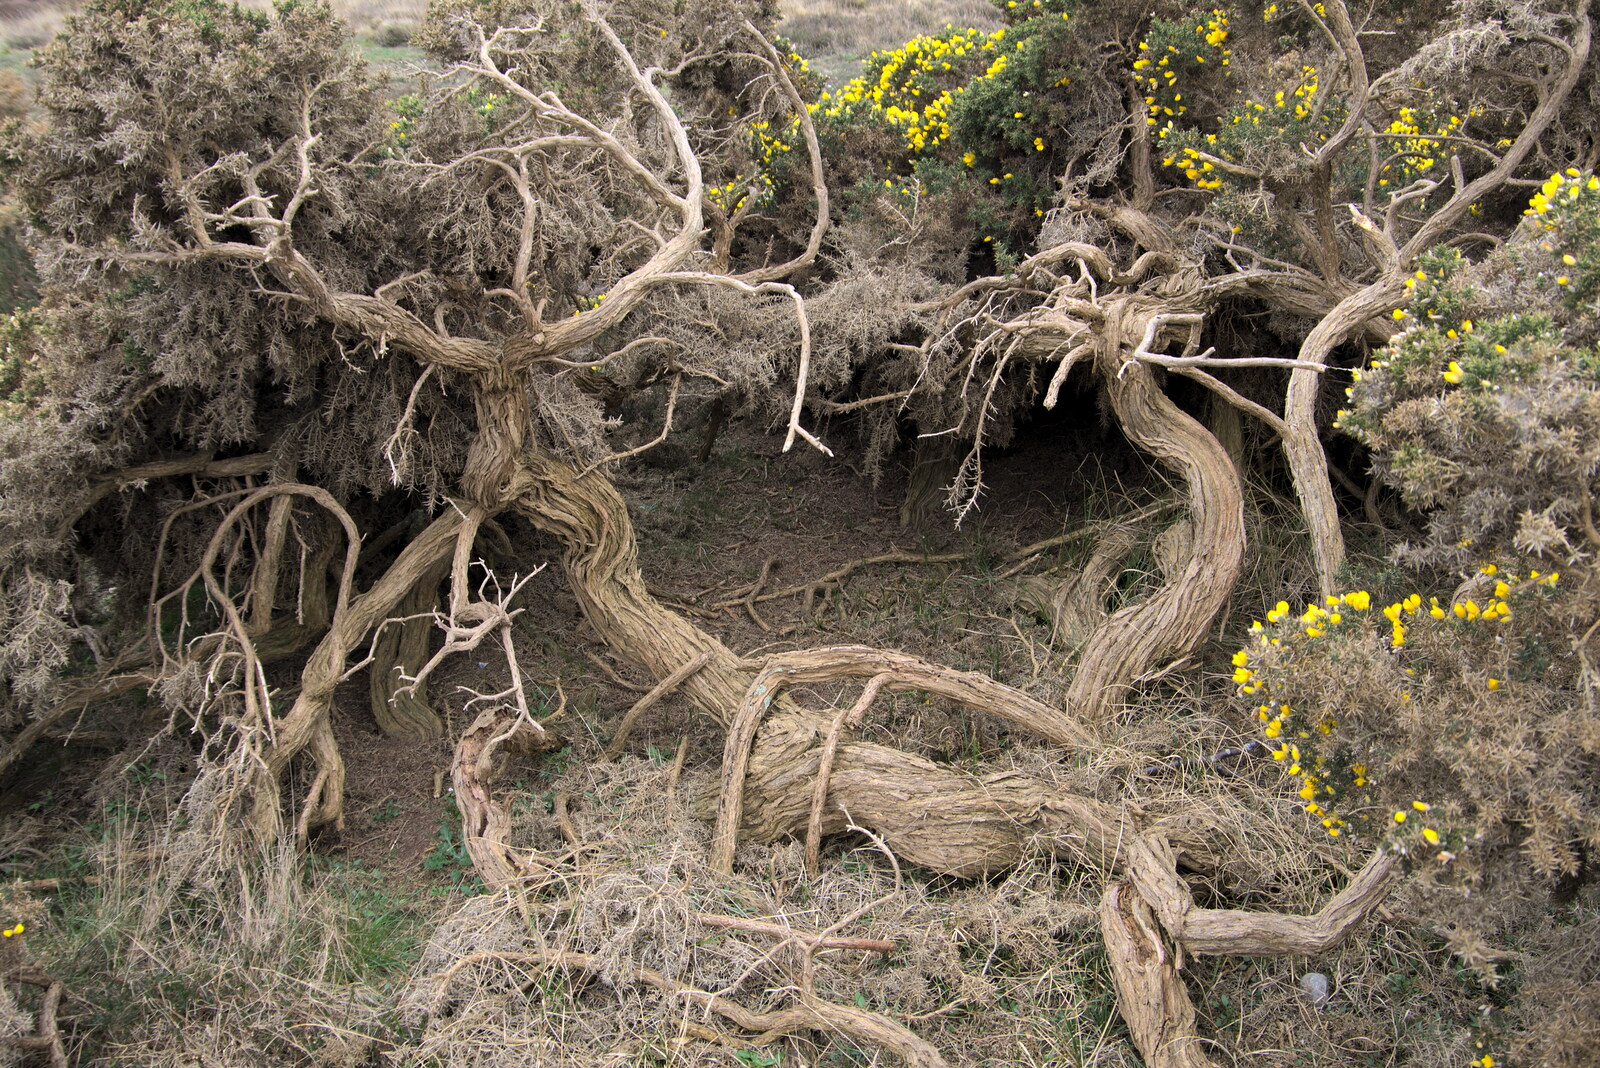 More gnarly gorse from A Trip to Dunwich Beach, Dunwich, Suffolk - 2nd April 2021